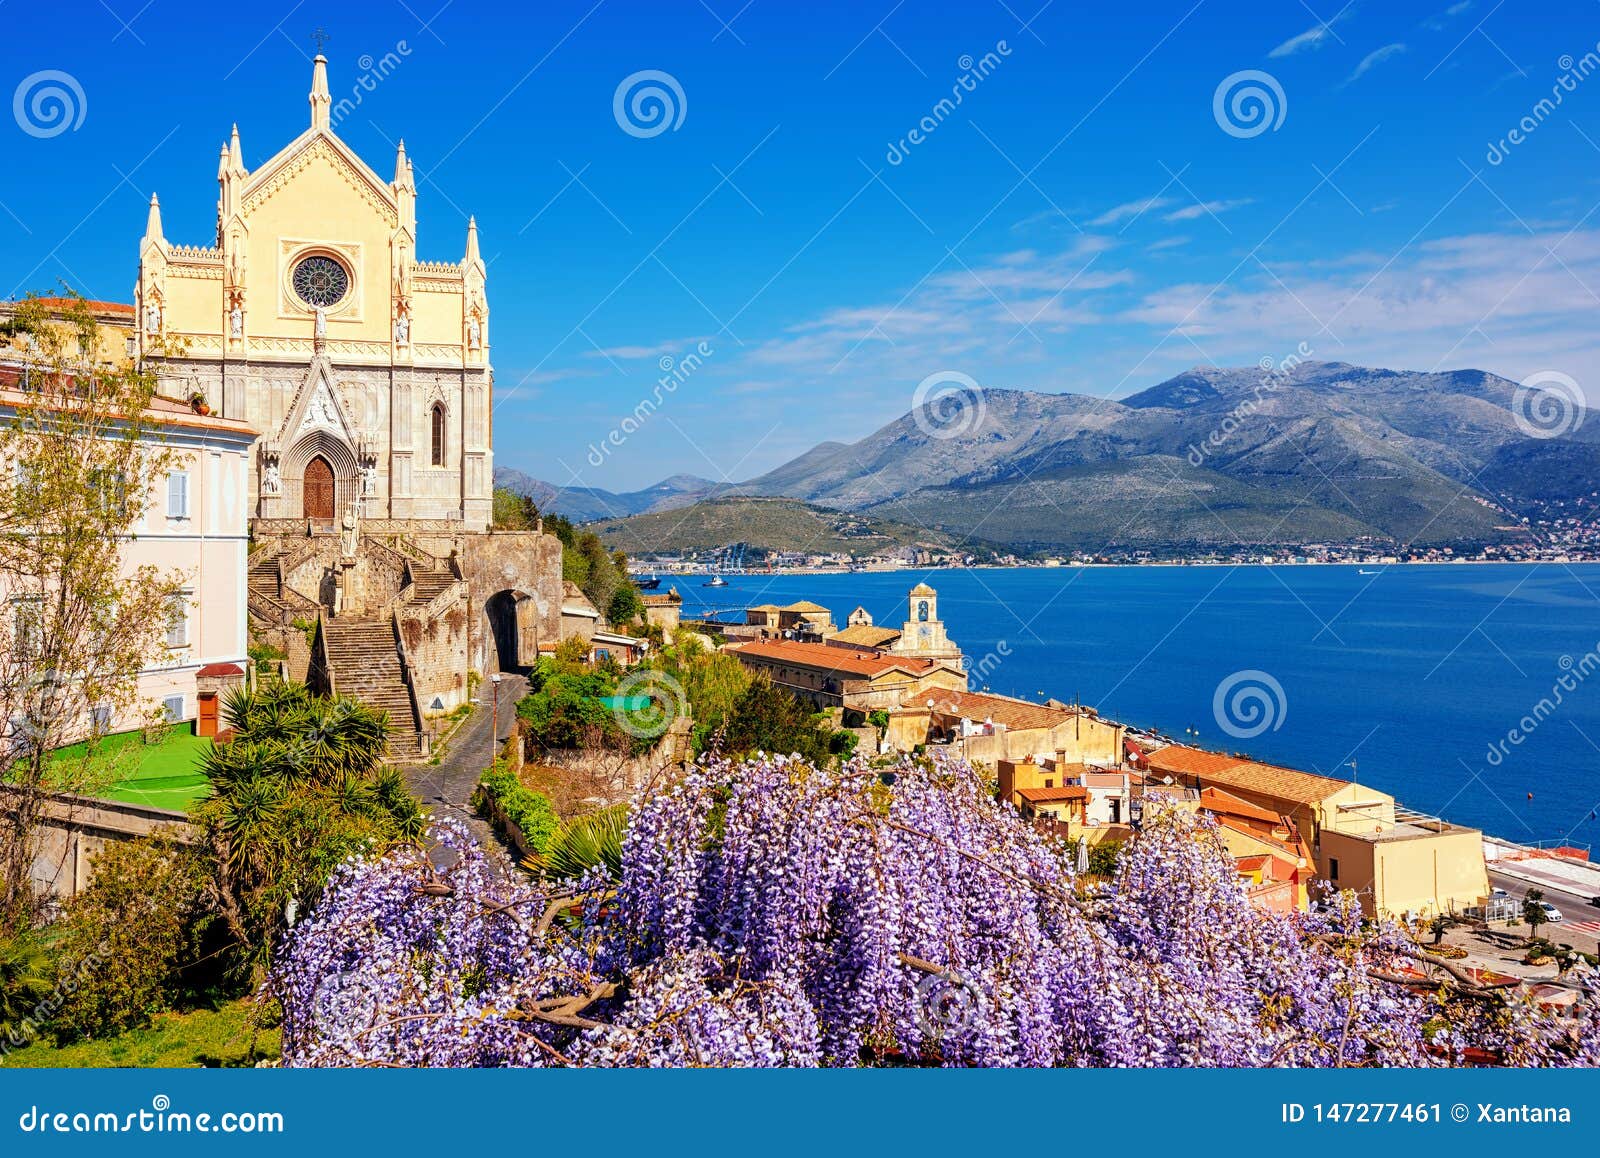 Blooming Wisteria Flowers in Gaeta Old Town, Italy Stock Image - Image ...